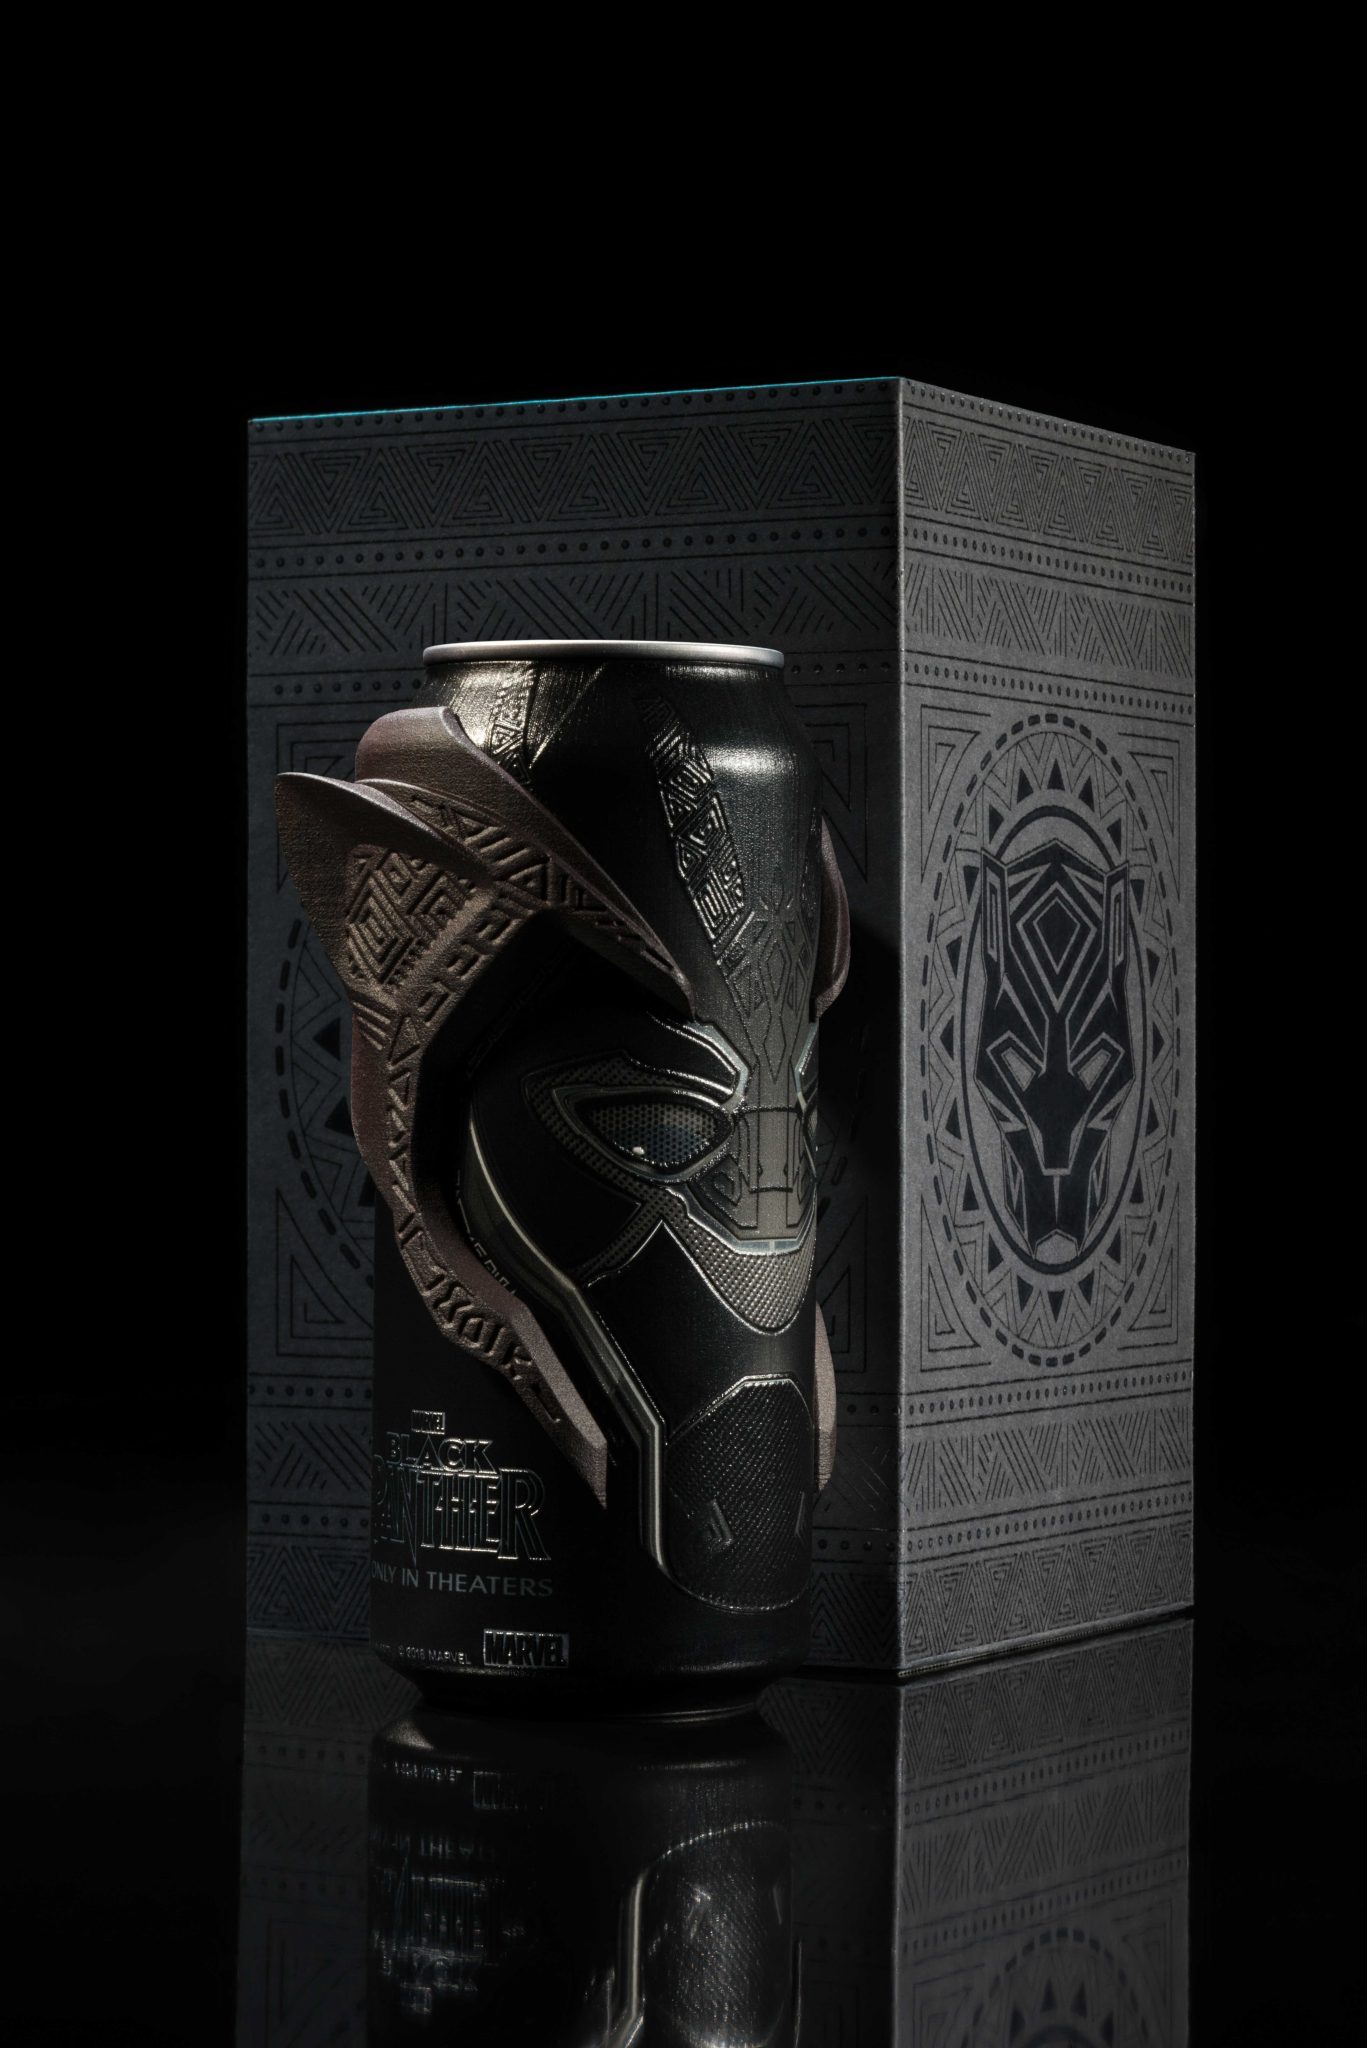 Black Panther Brisk promotion produced by Protolabs.